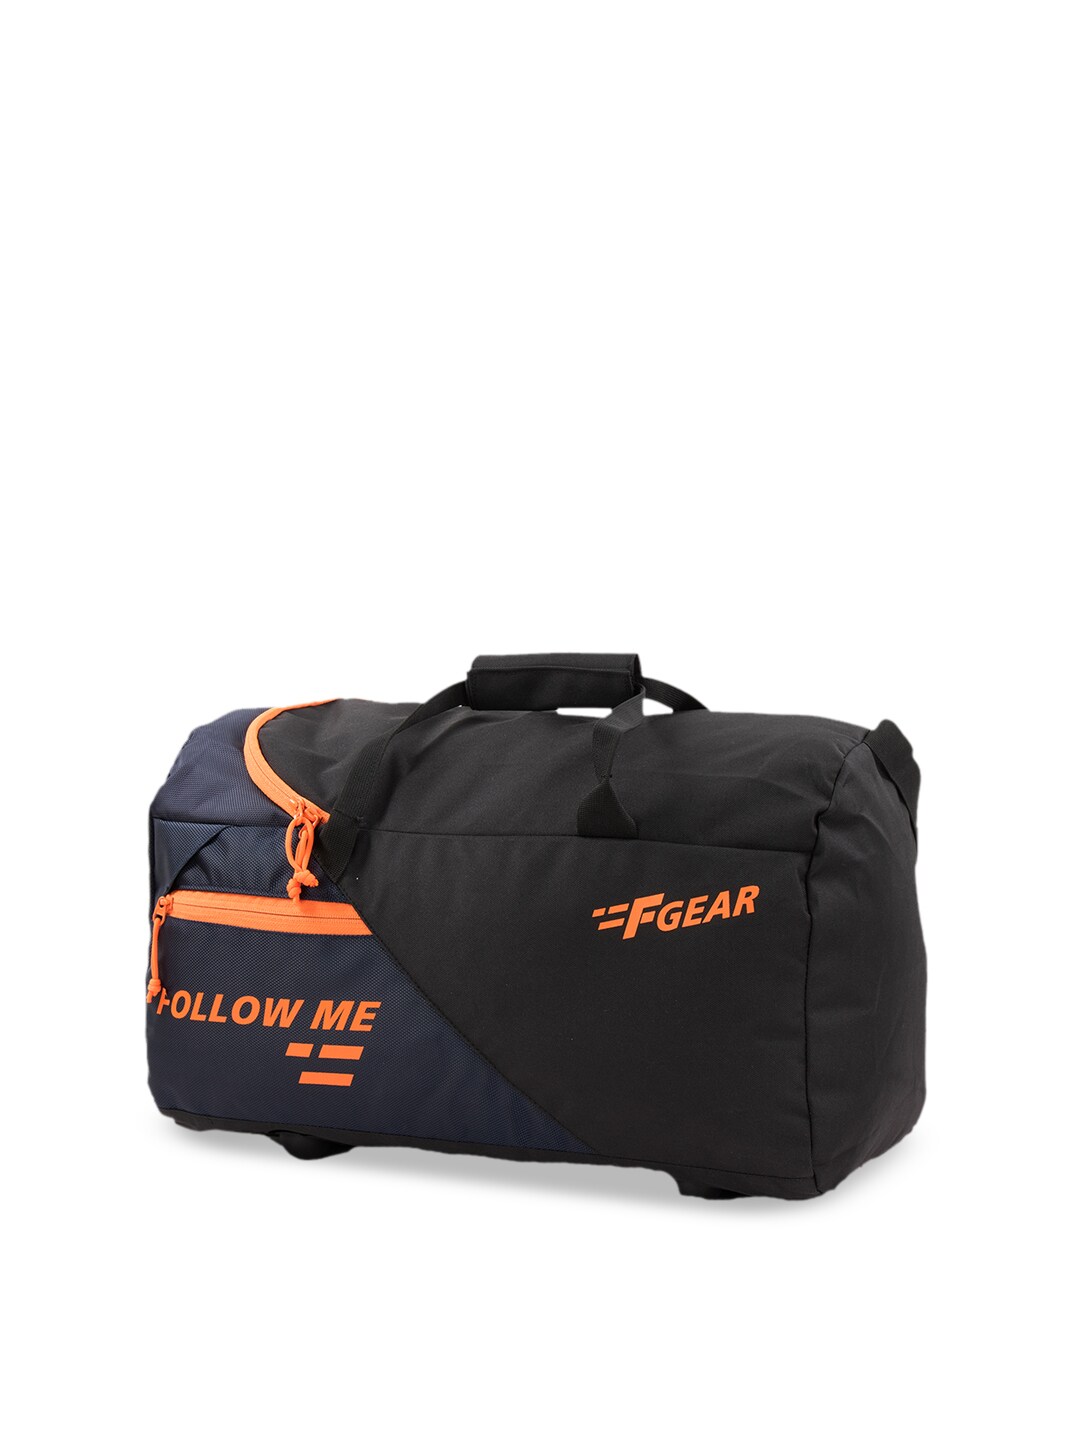 F Gear Unisex Black & Navy Blue Colourblocked Gym Duffel Bag with Printed Detail Price in India